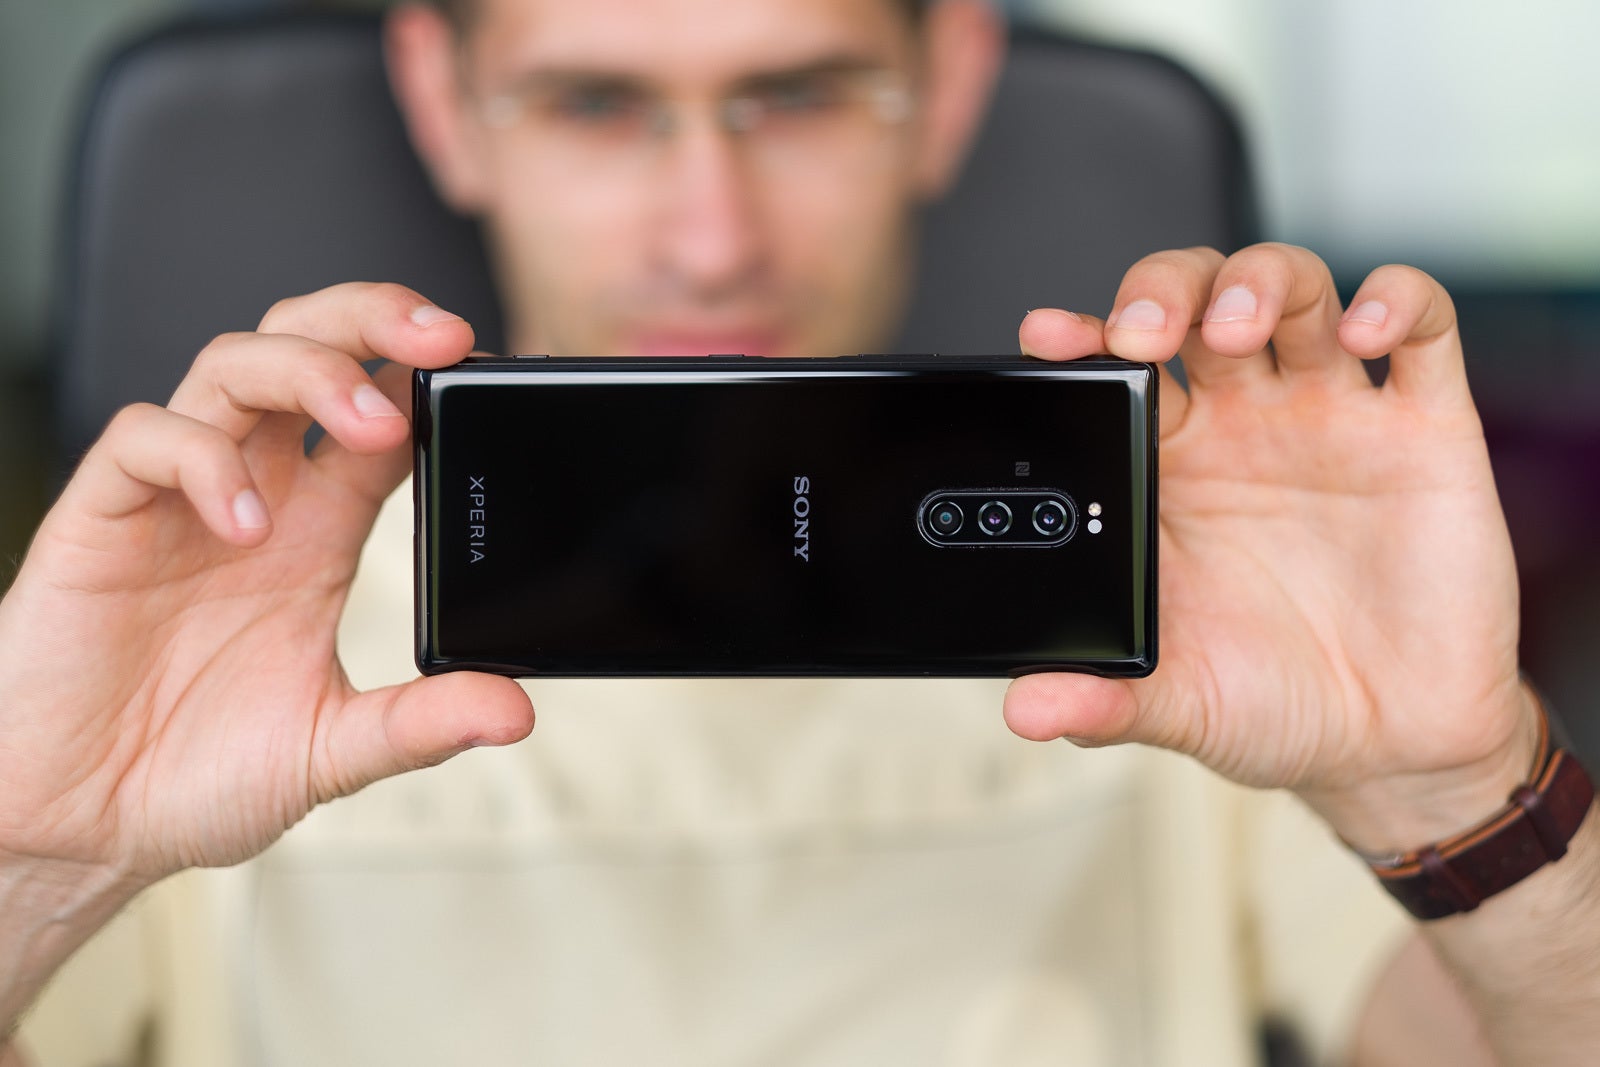 The Xperia 1 - Sony's next Xperia could have the Snapdragon 865 and 5G